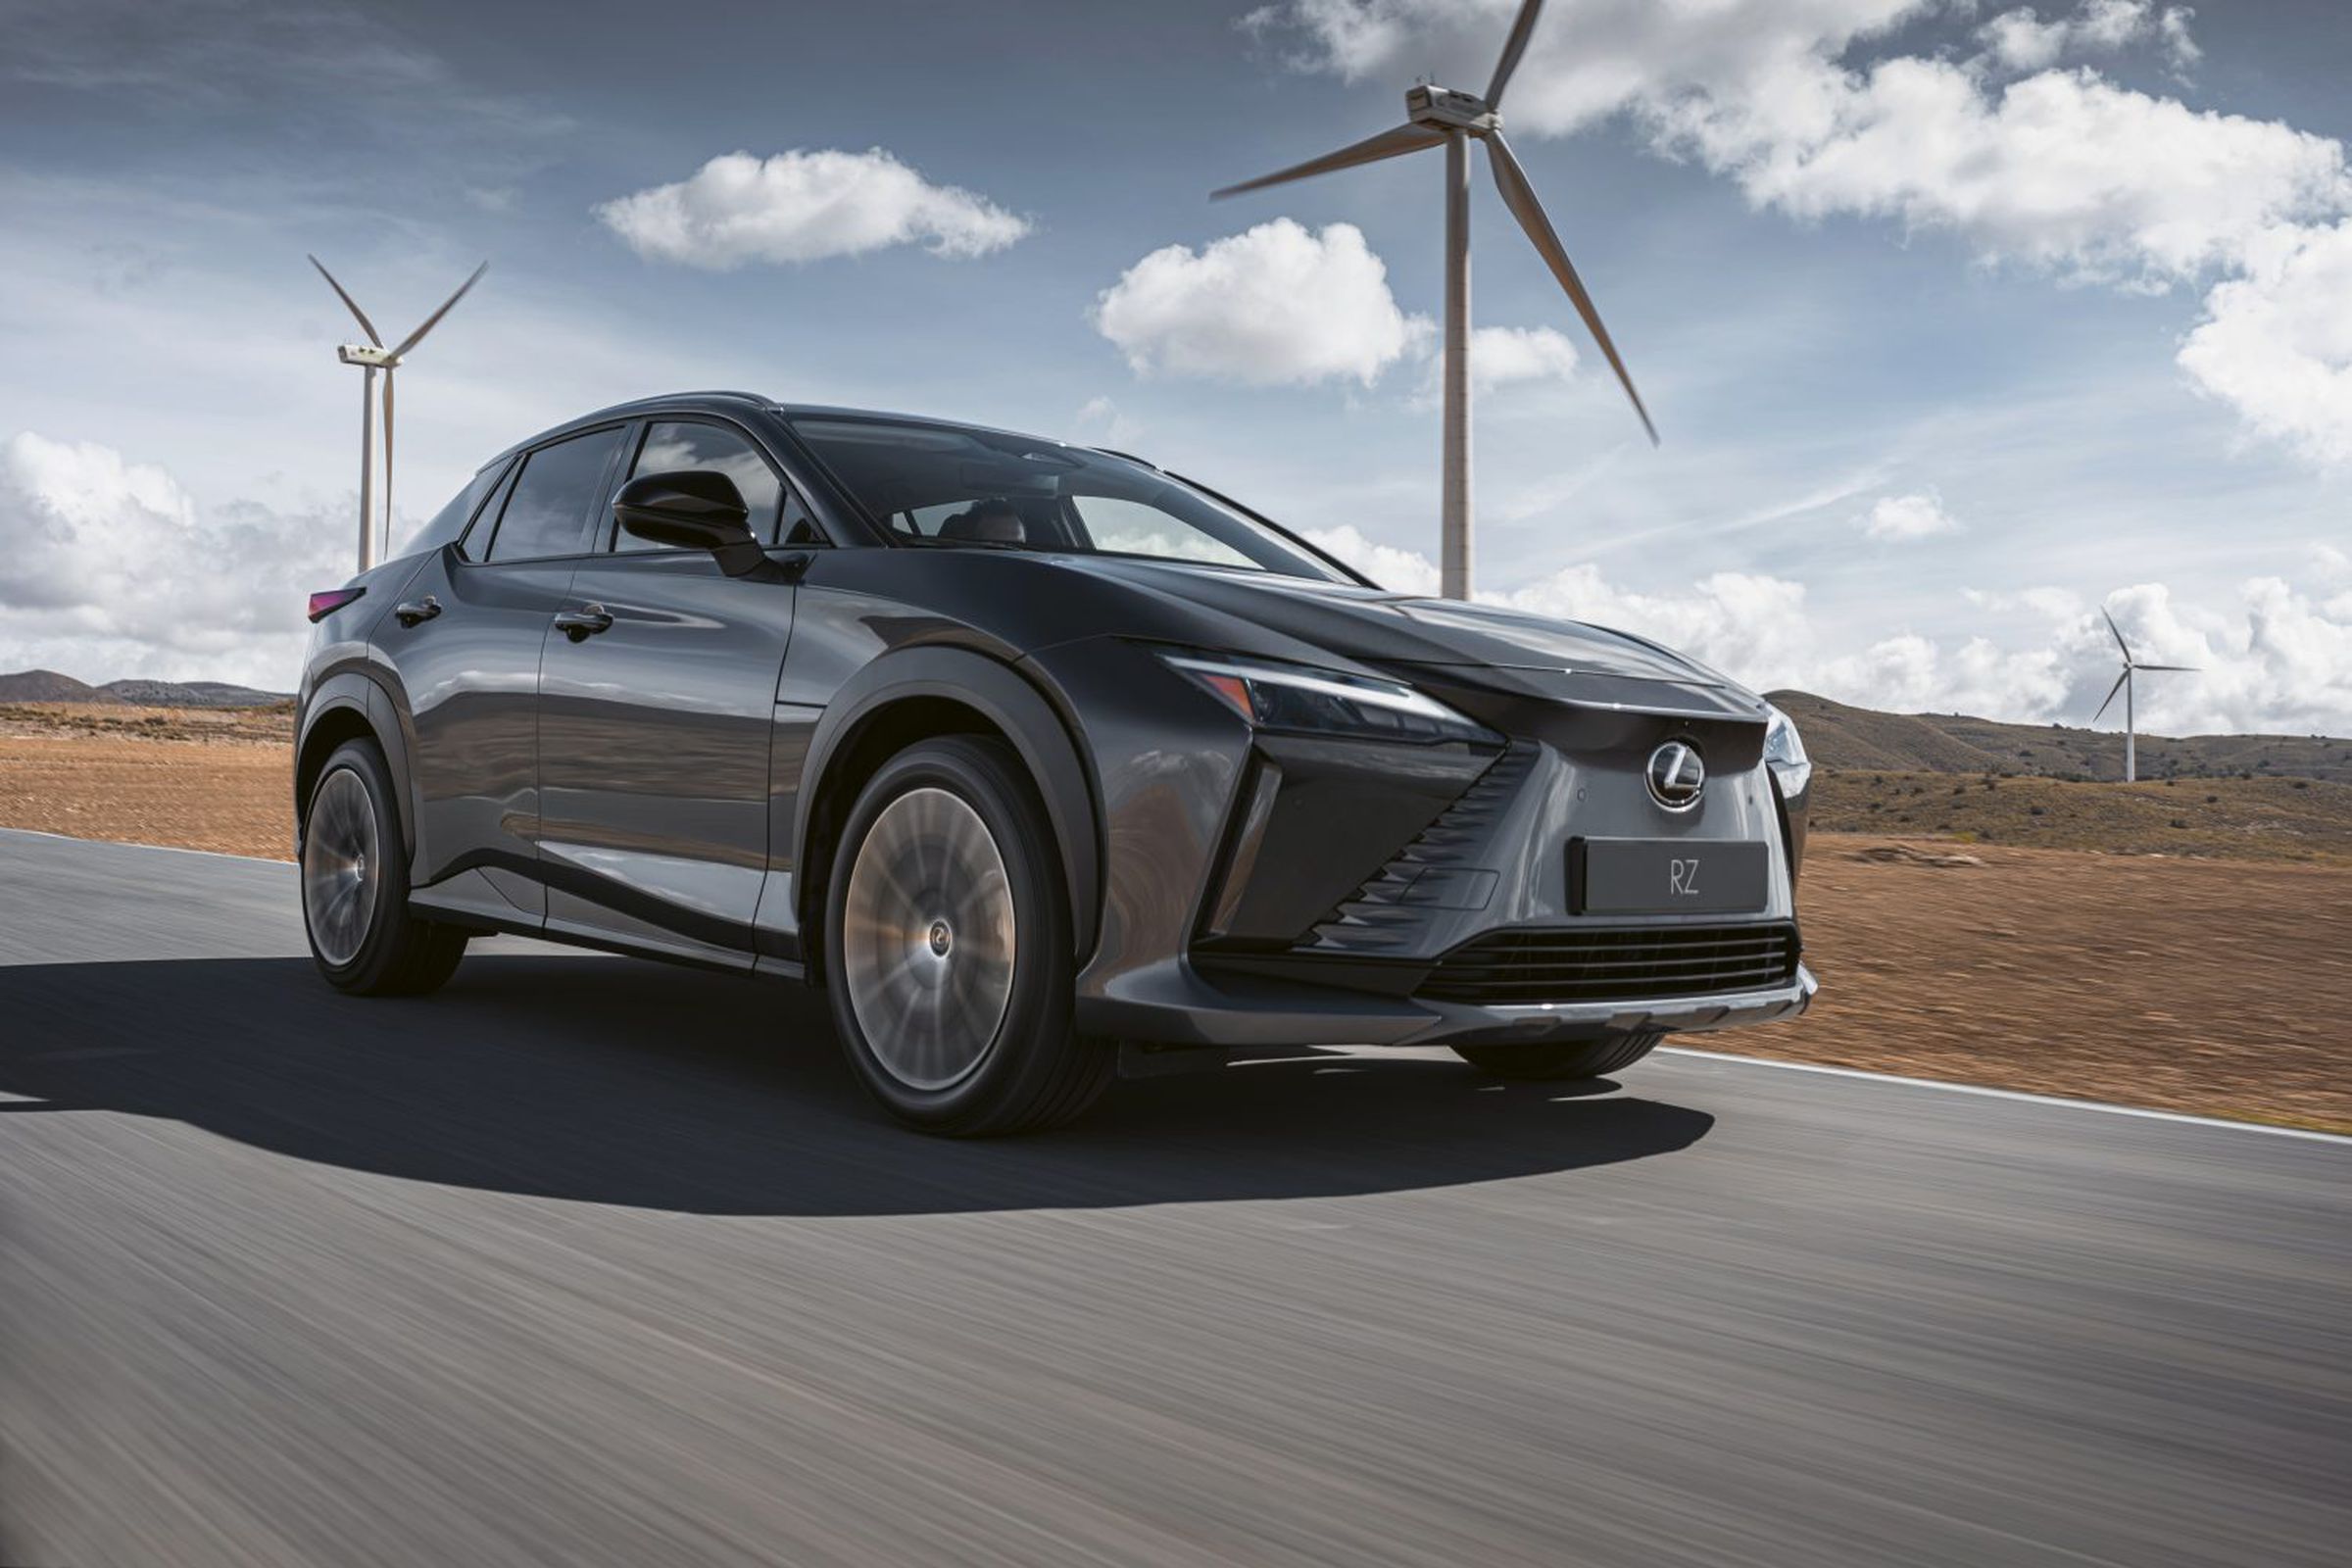 Lexus’ first ever electric vehicle is the RZ 450e SUV.